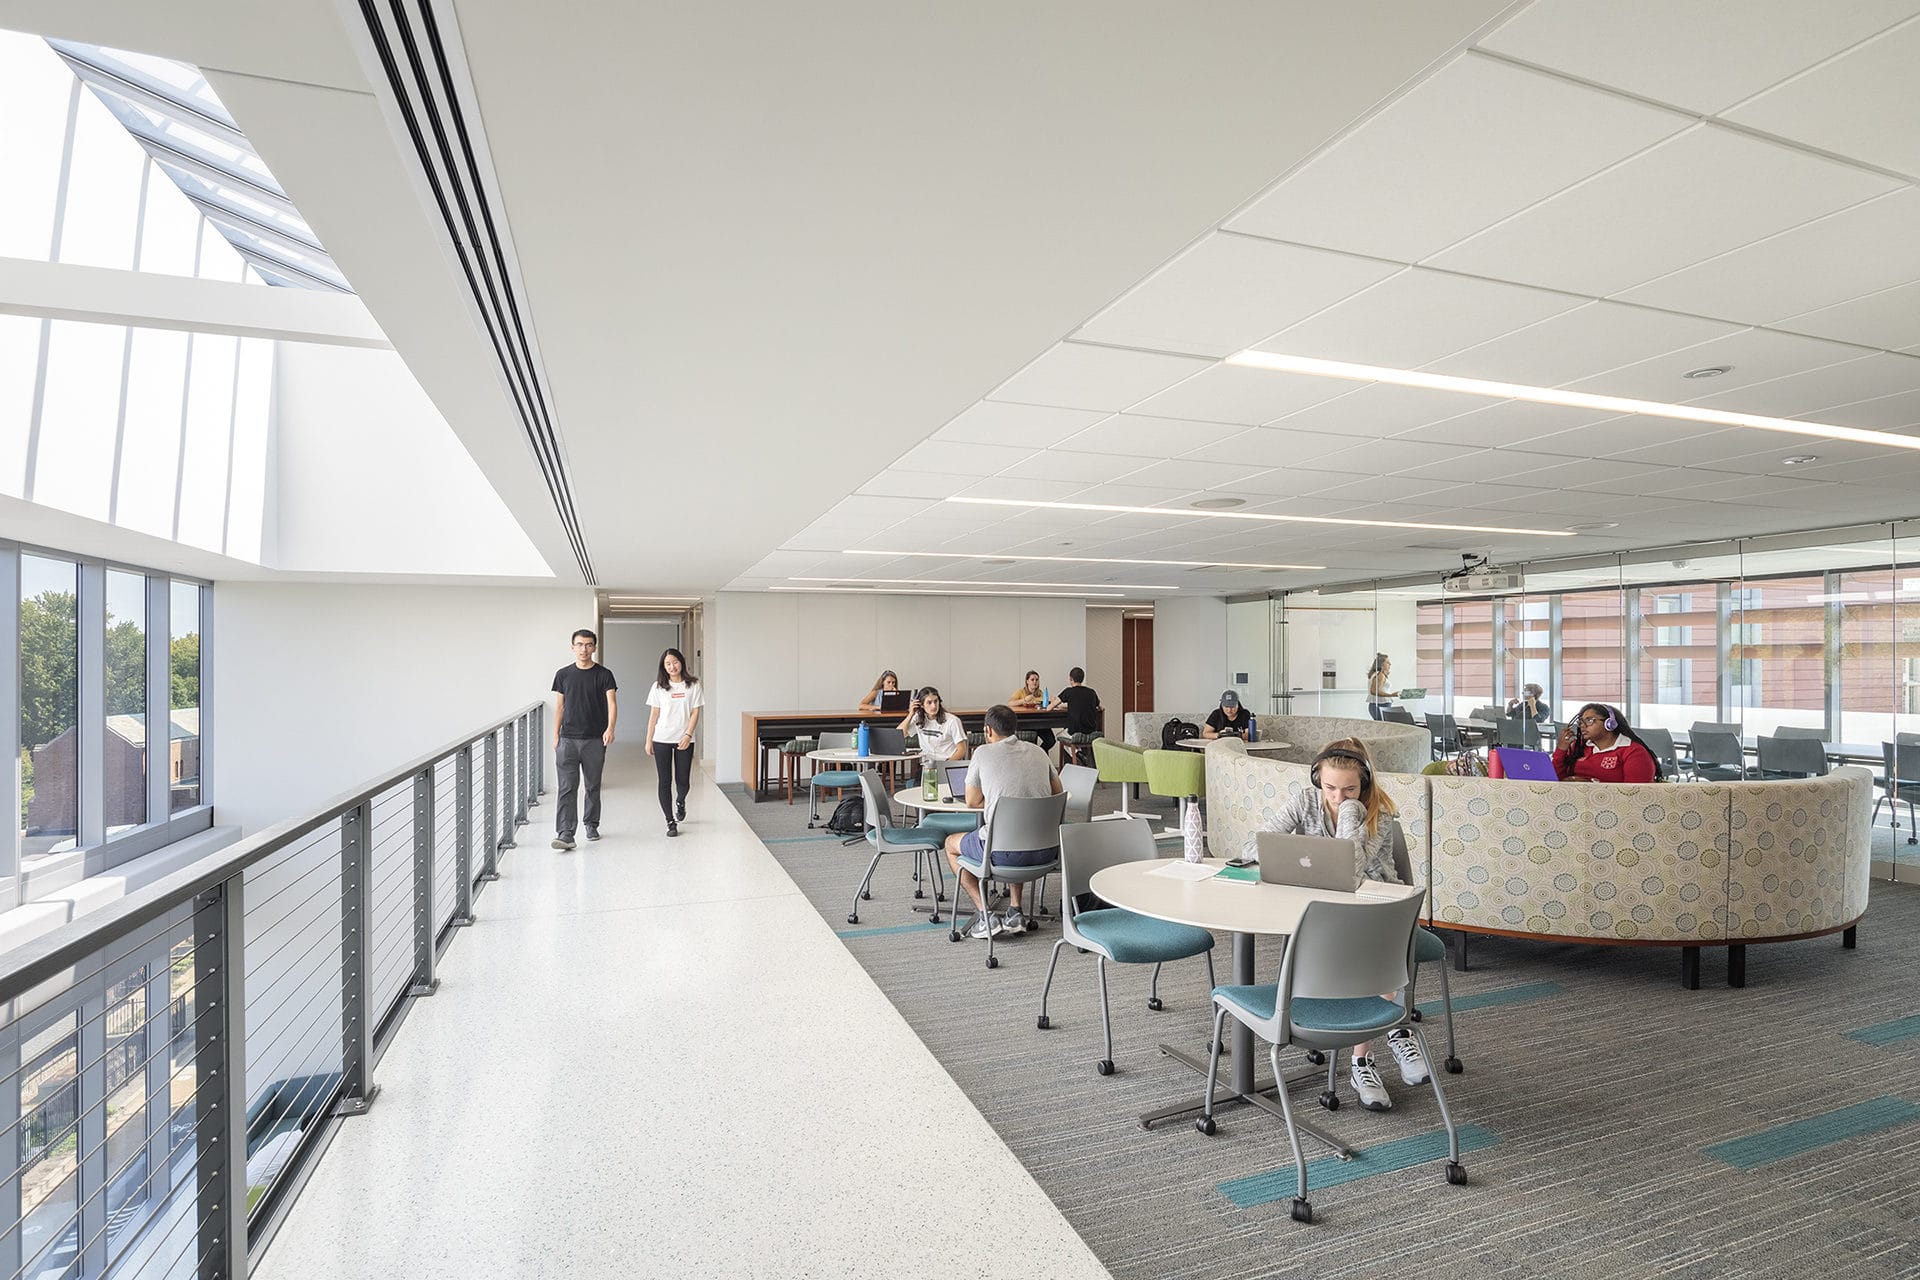 washington university bryan hall lounge designed by trivers architectural firm in st. louis